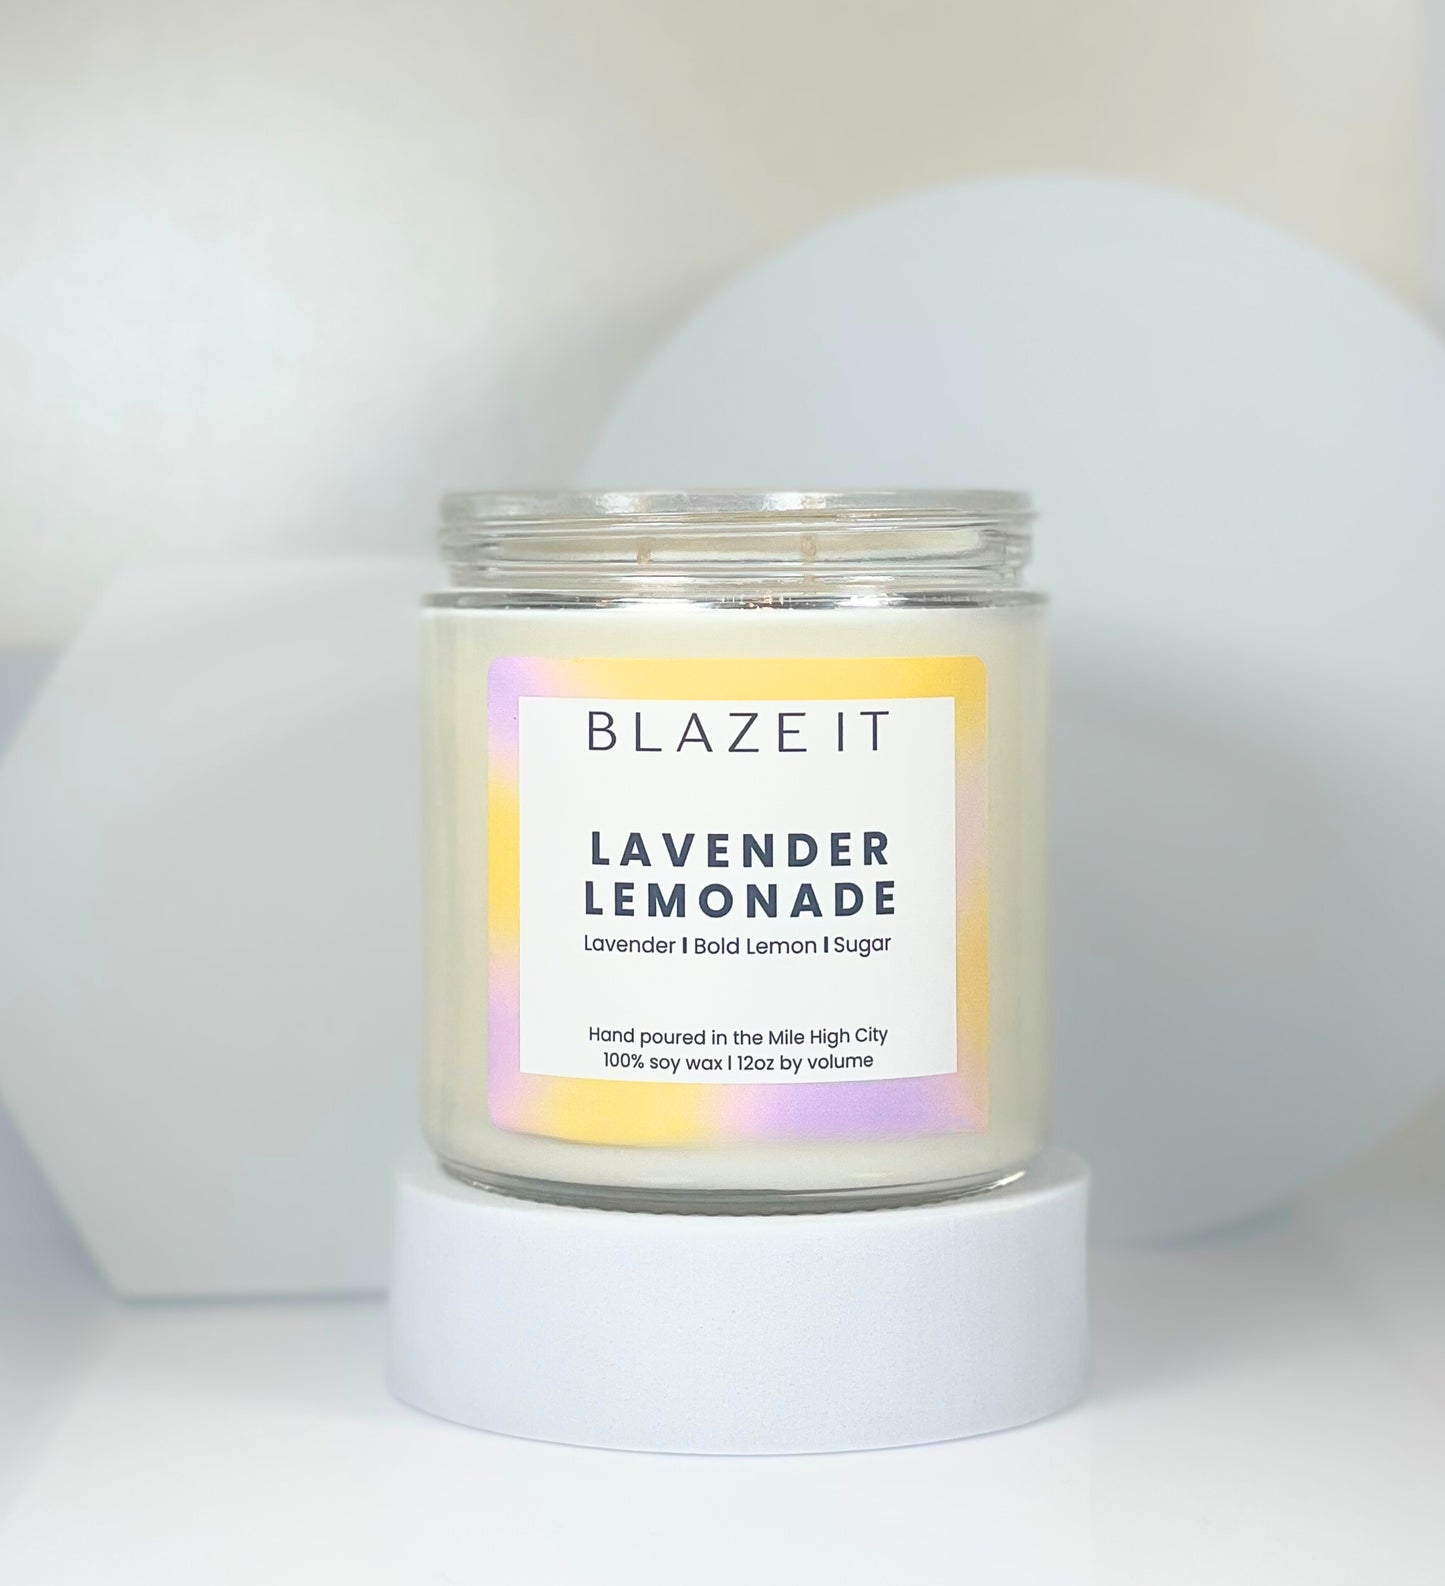 Lavender Lemonade 12oz double wick candle with notes of Lavender, Bold Lemon and Sugar